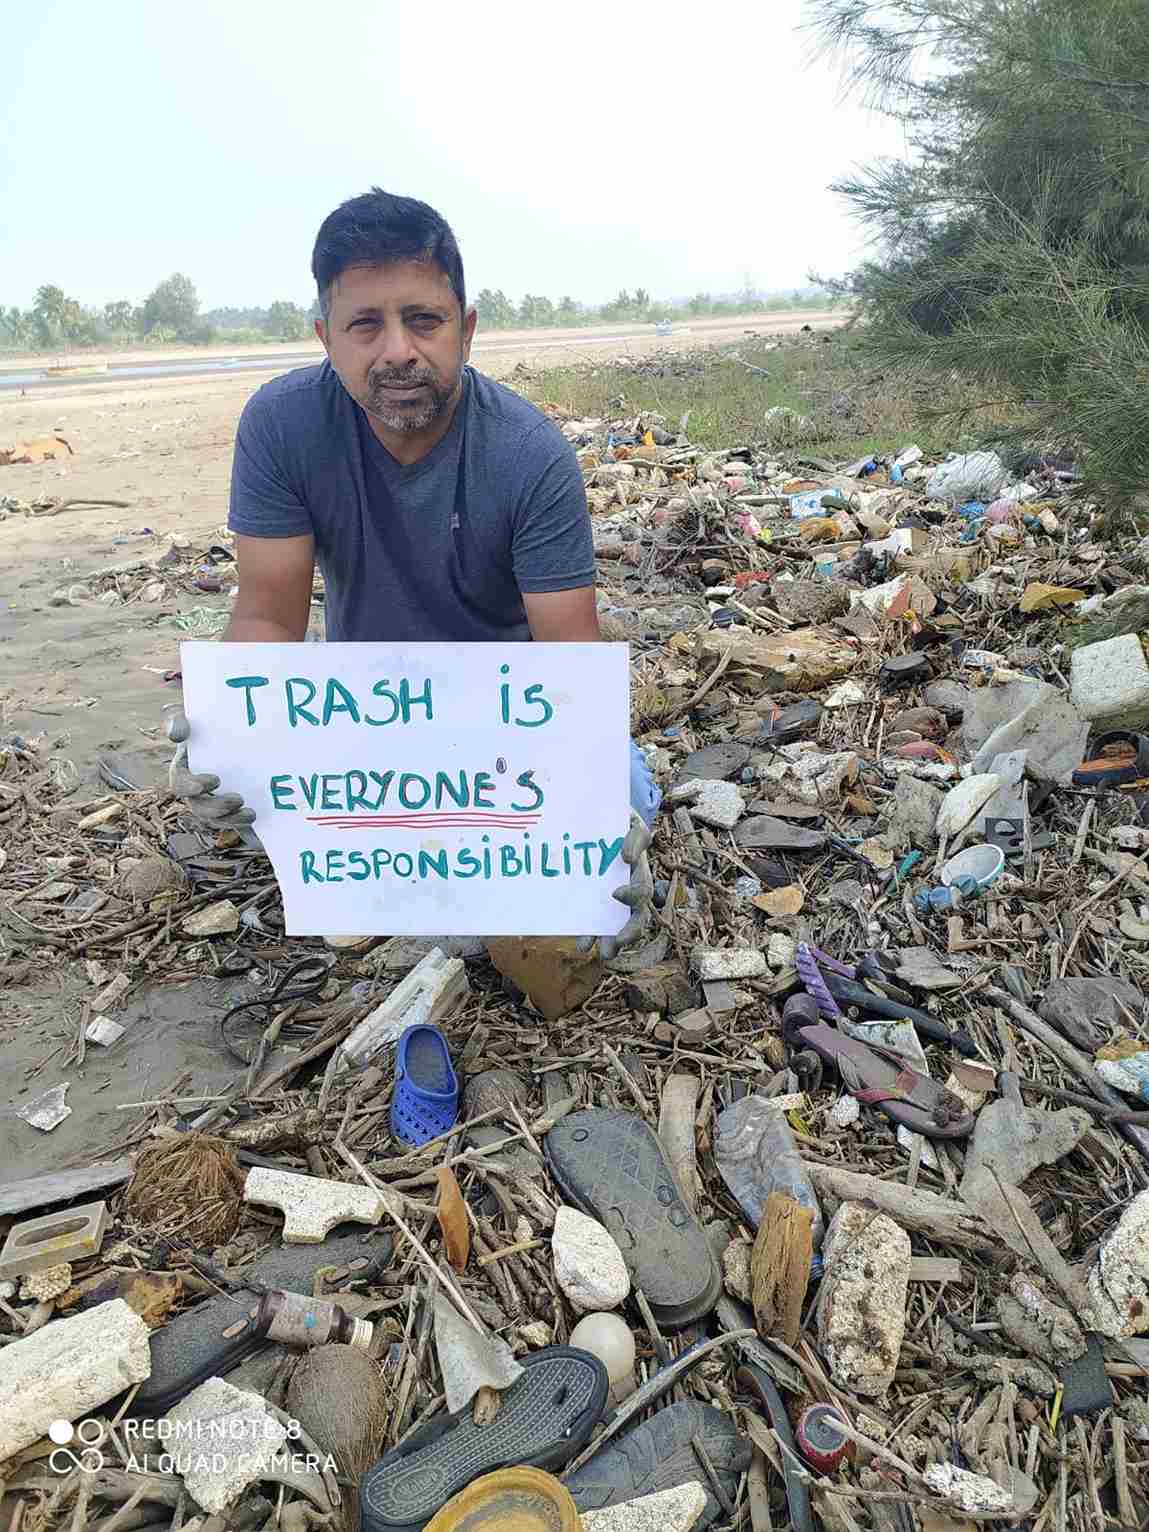 Lisbon Ferrao at one of the beach clean ups